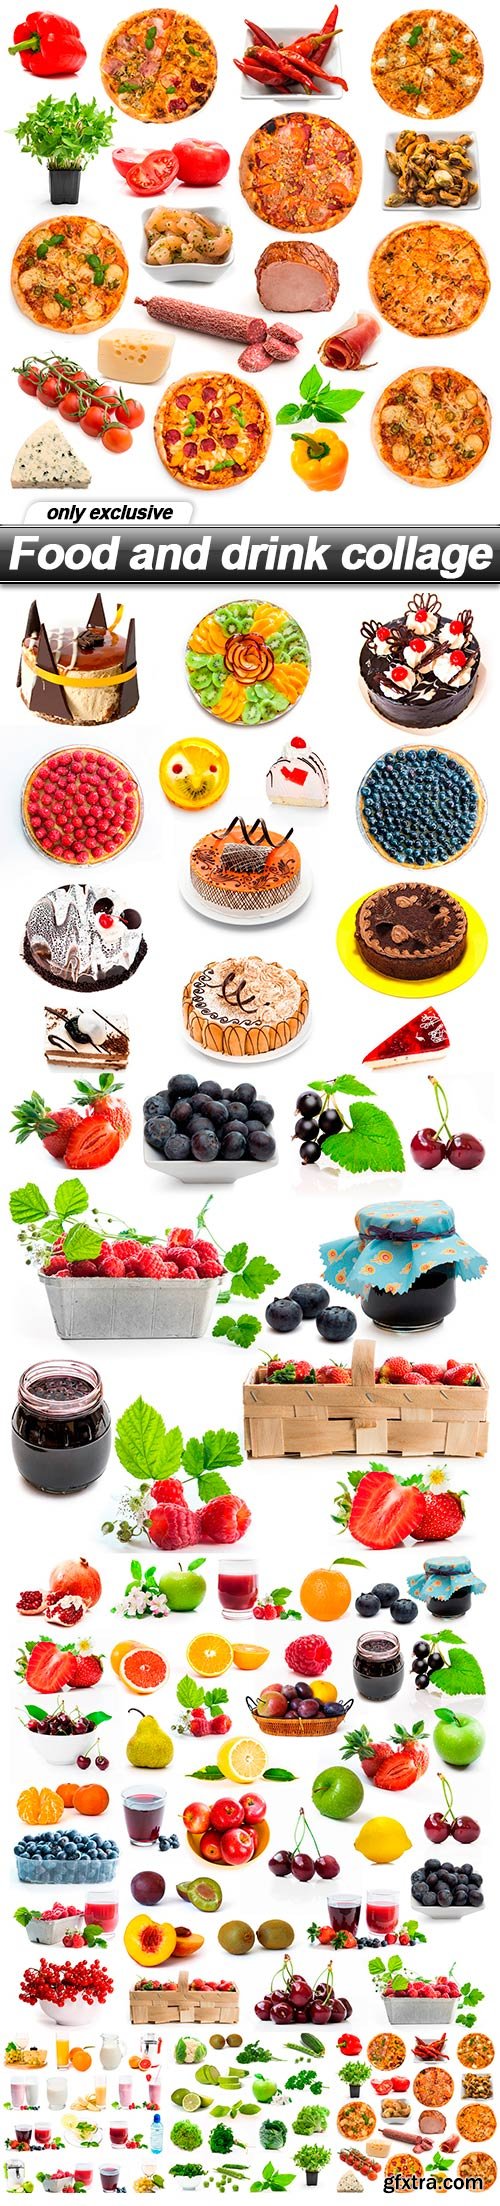 Food and drink collage - 6 UHQ JPEG